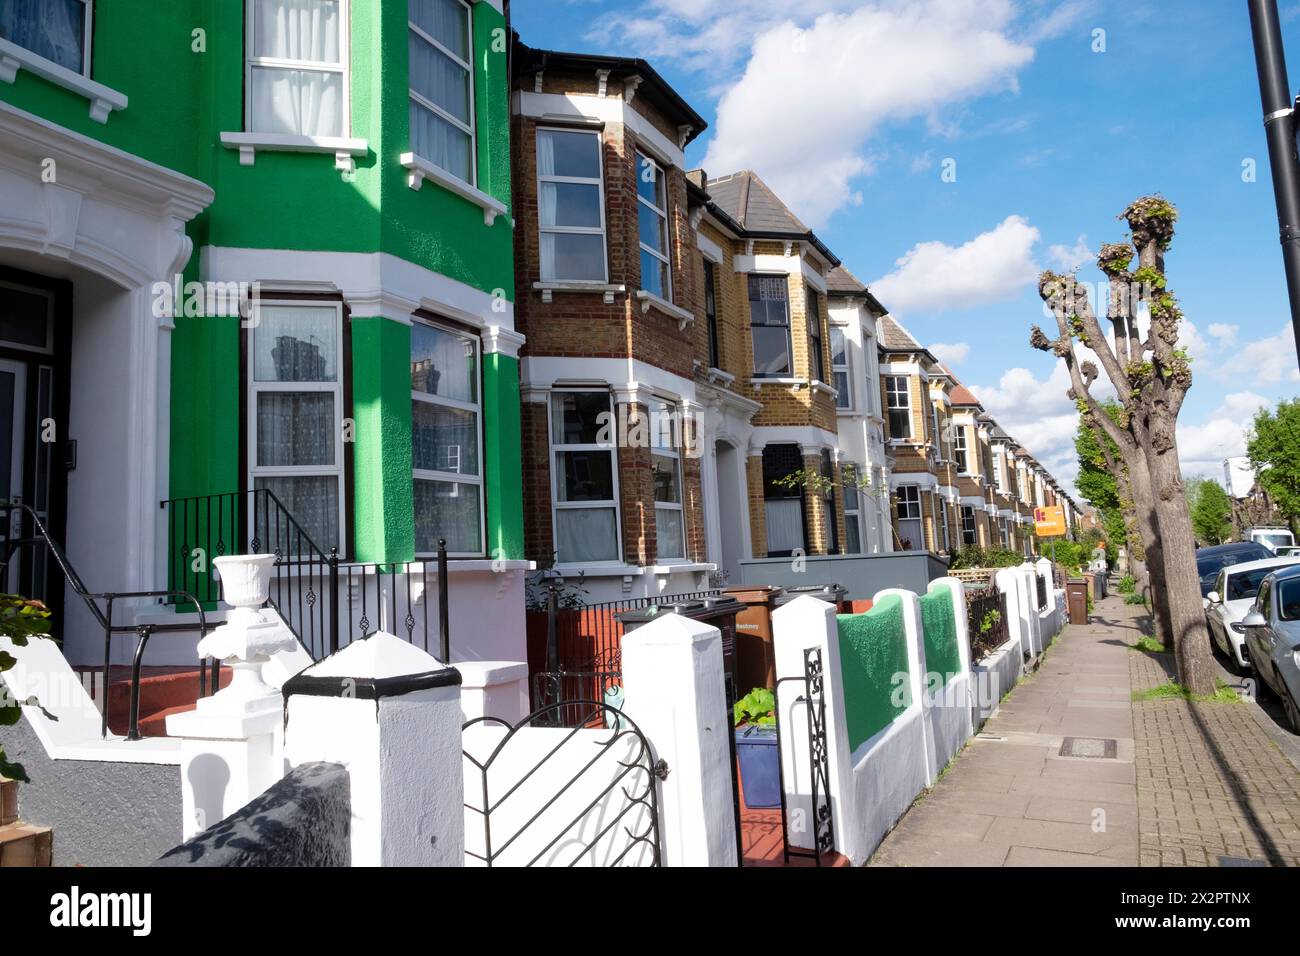 Row of terraced houses on Thistlewaite Road where Harold Pinter was born and lived as a child in Clapton Hackney East London UK  KATHY DEWITT Stock Photo